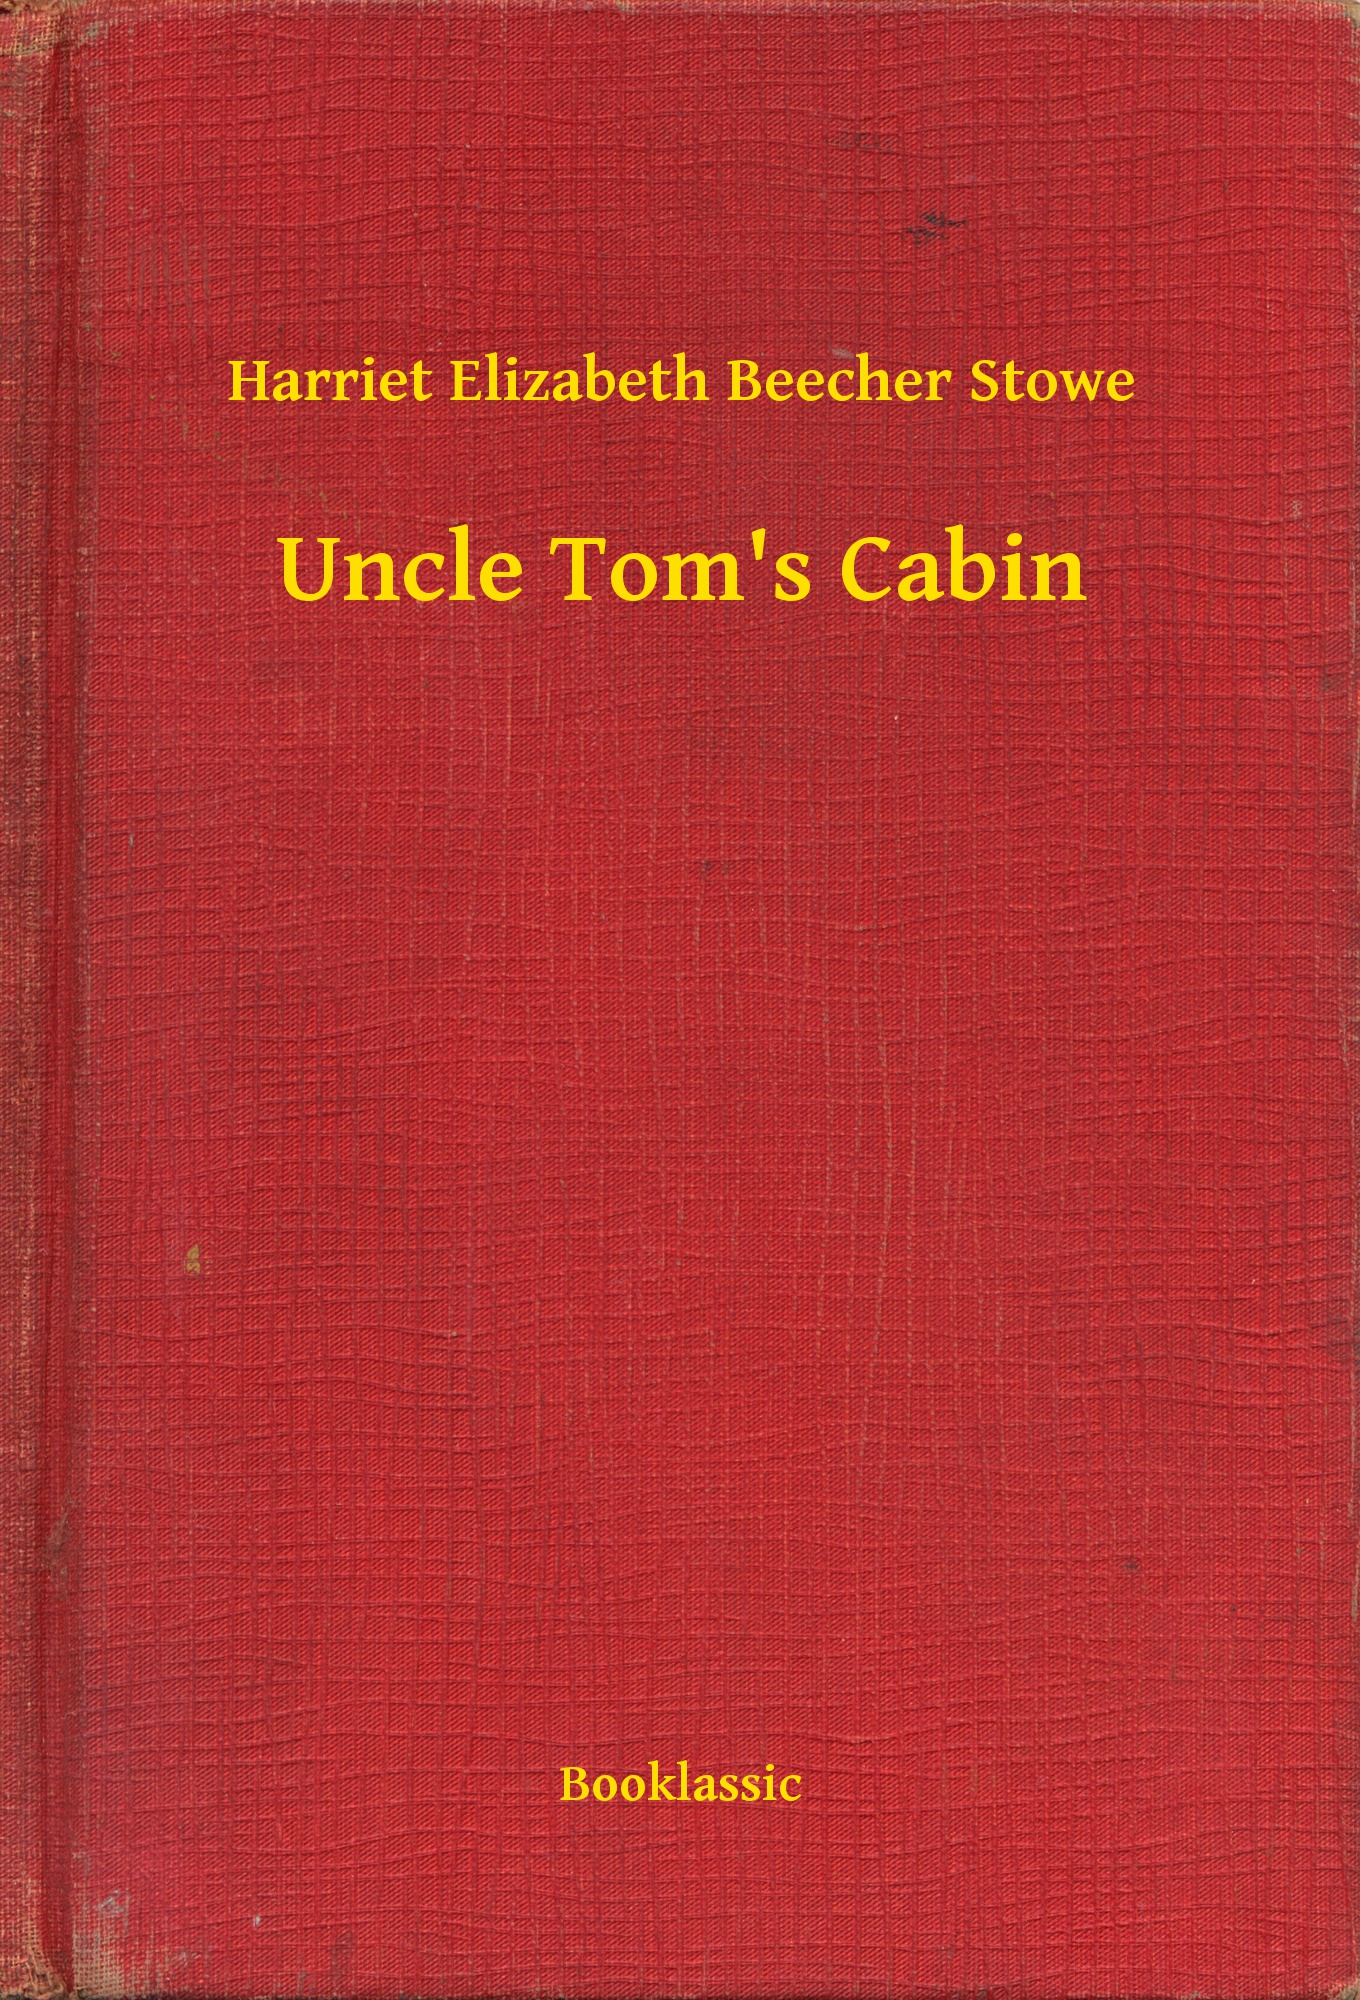 Uncle Tom"s Cabin